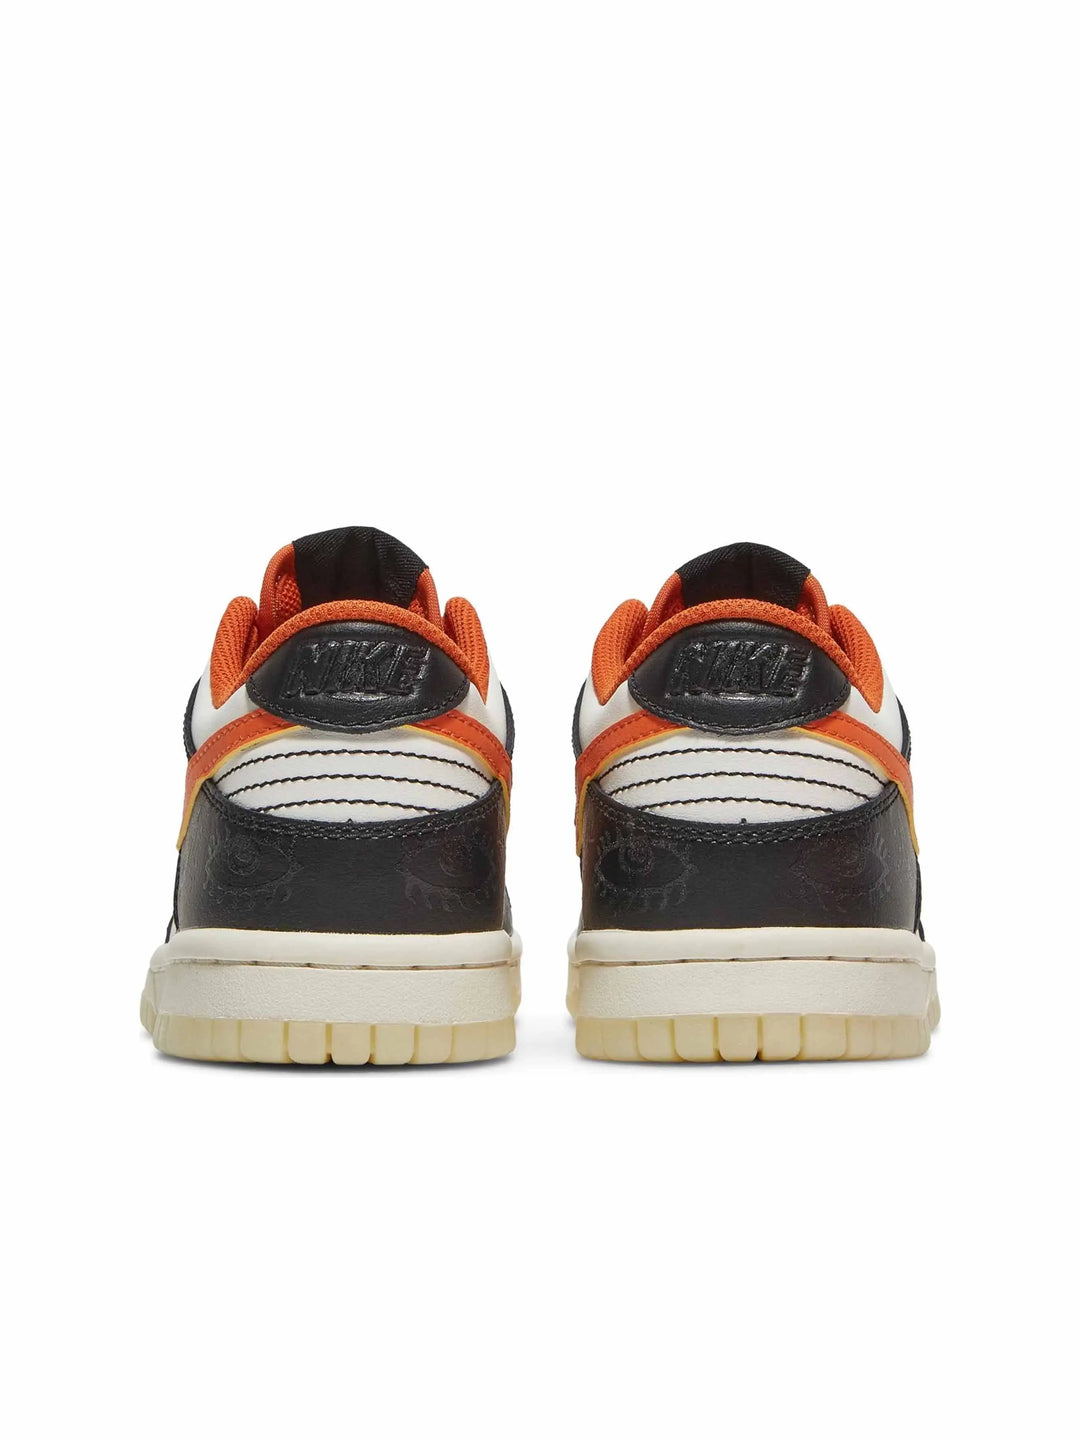 Nike Dunk Low PRM Halloween (2021) (GS) - Prior